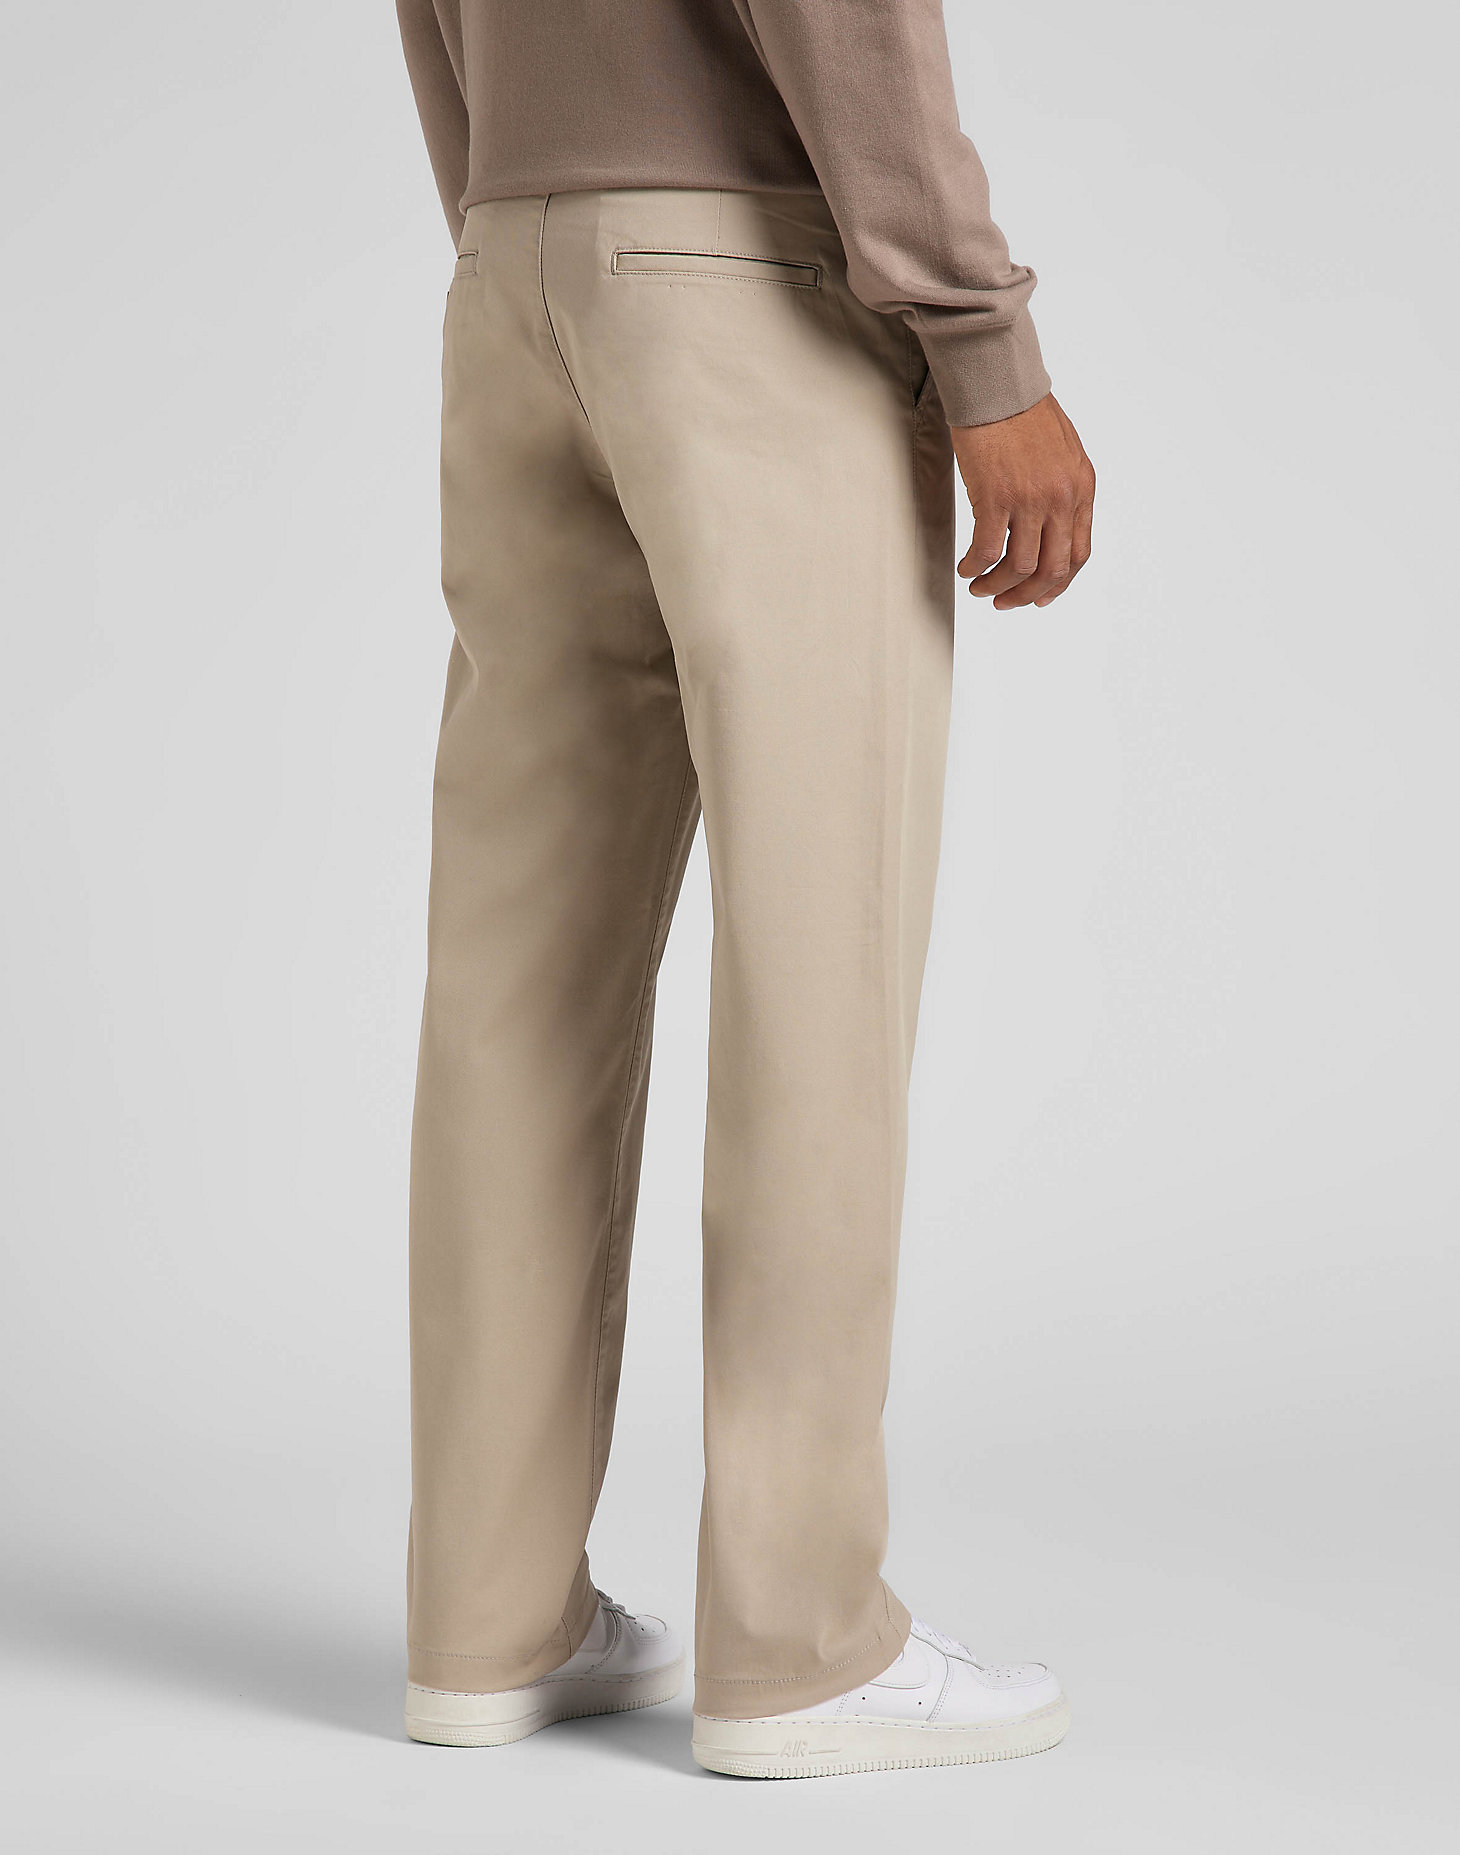 Relaxed Chino in Stone alternative view 1